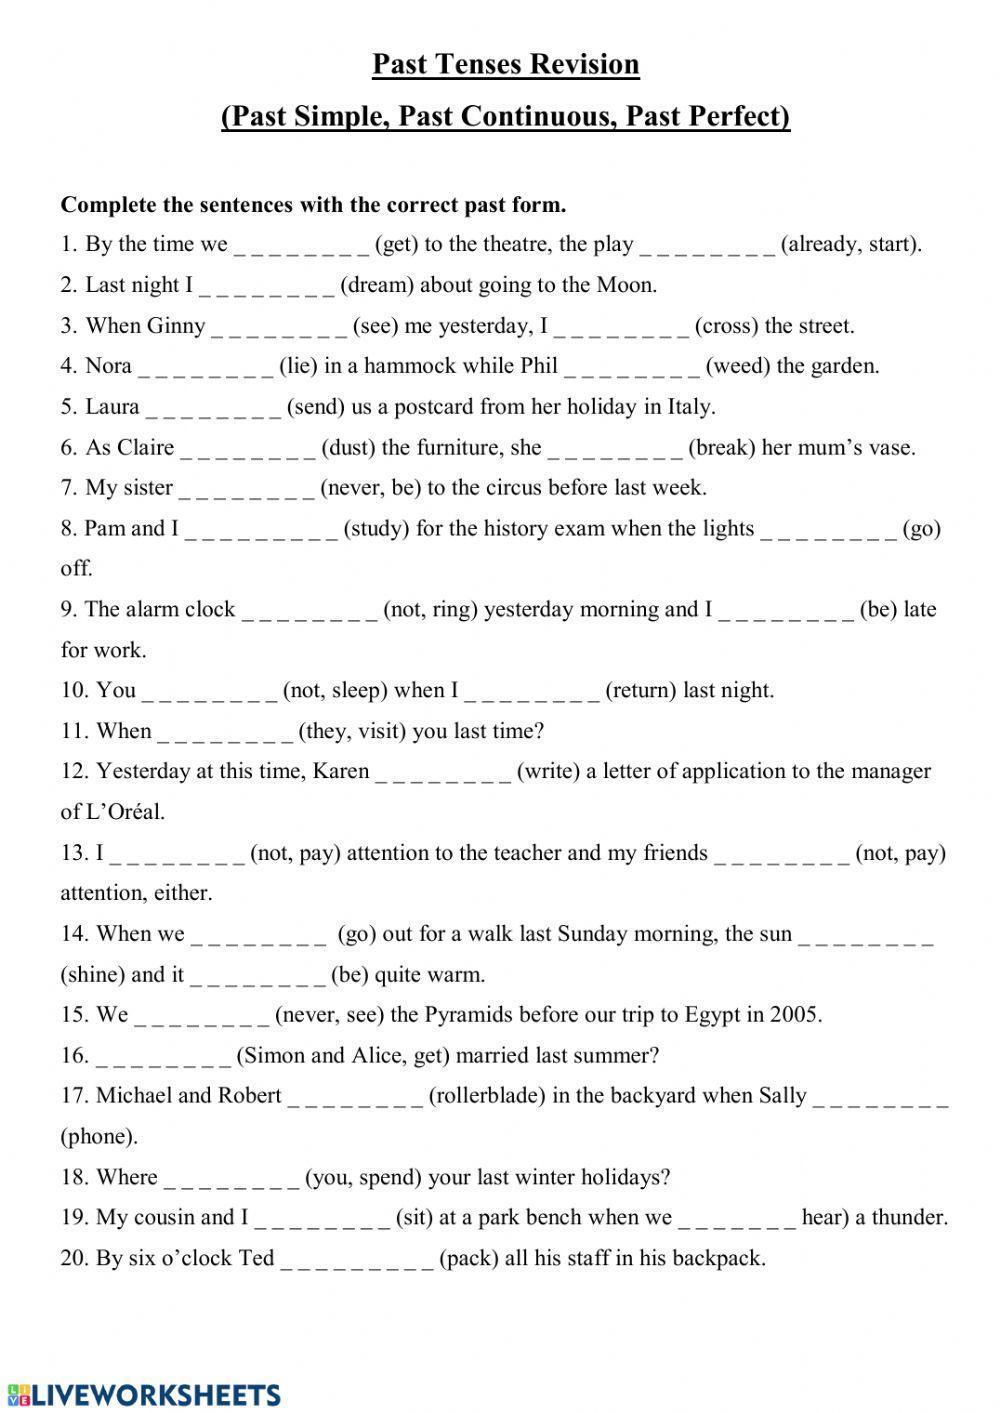 Past Tenses interactive exercise | Live Worksheets